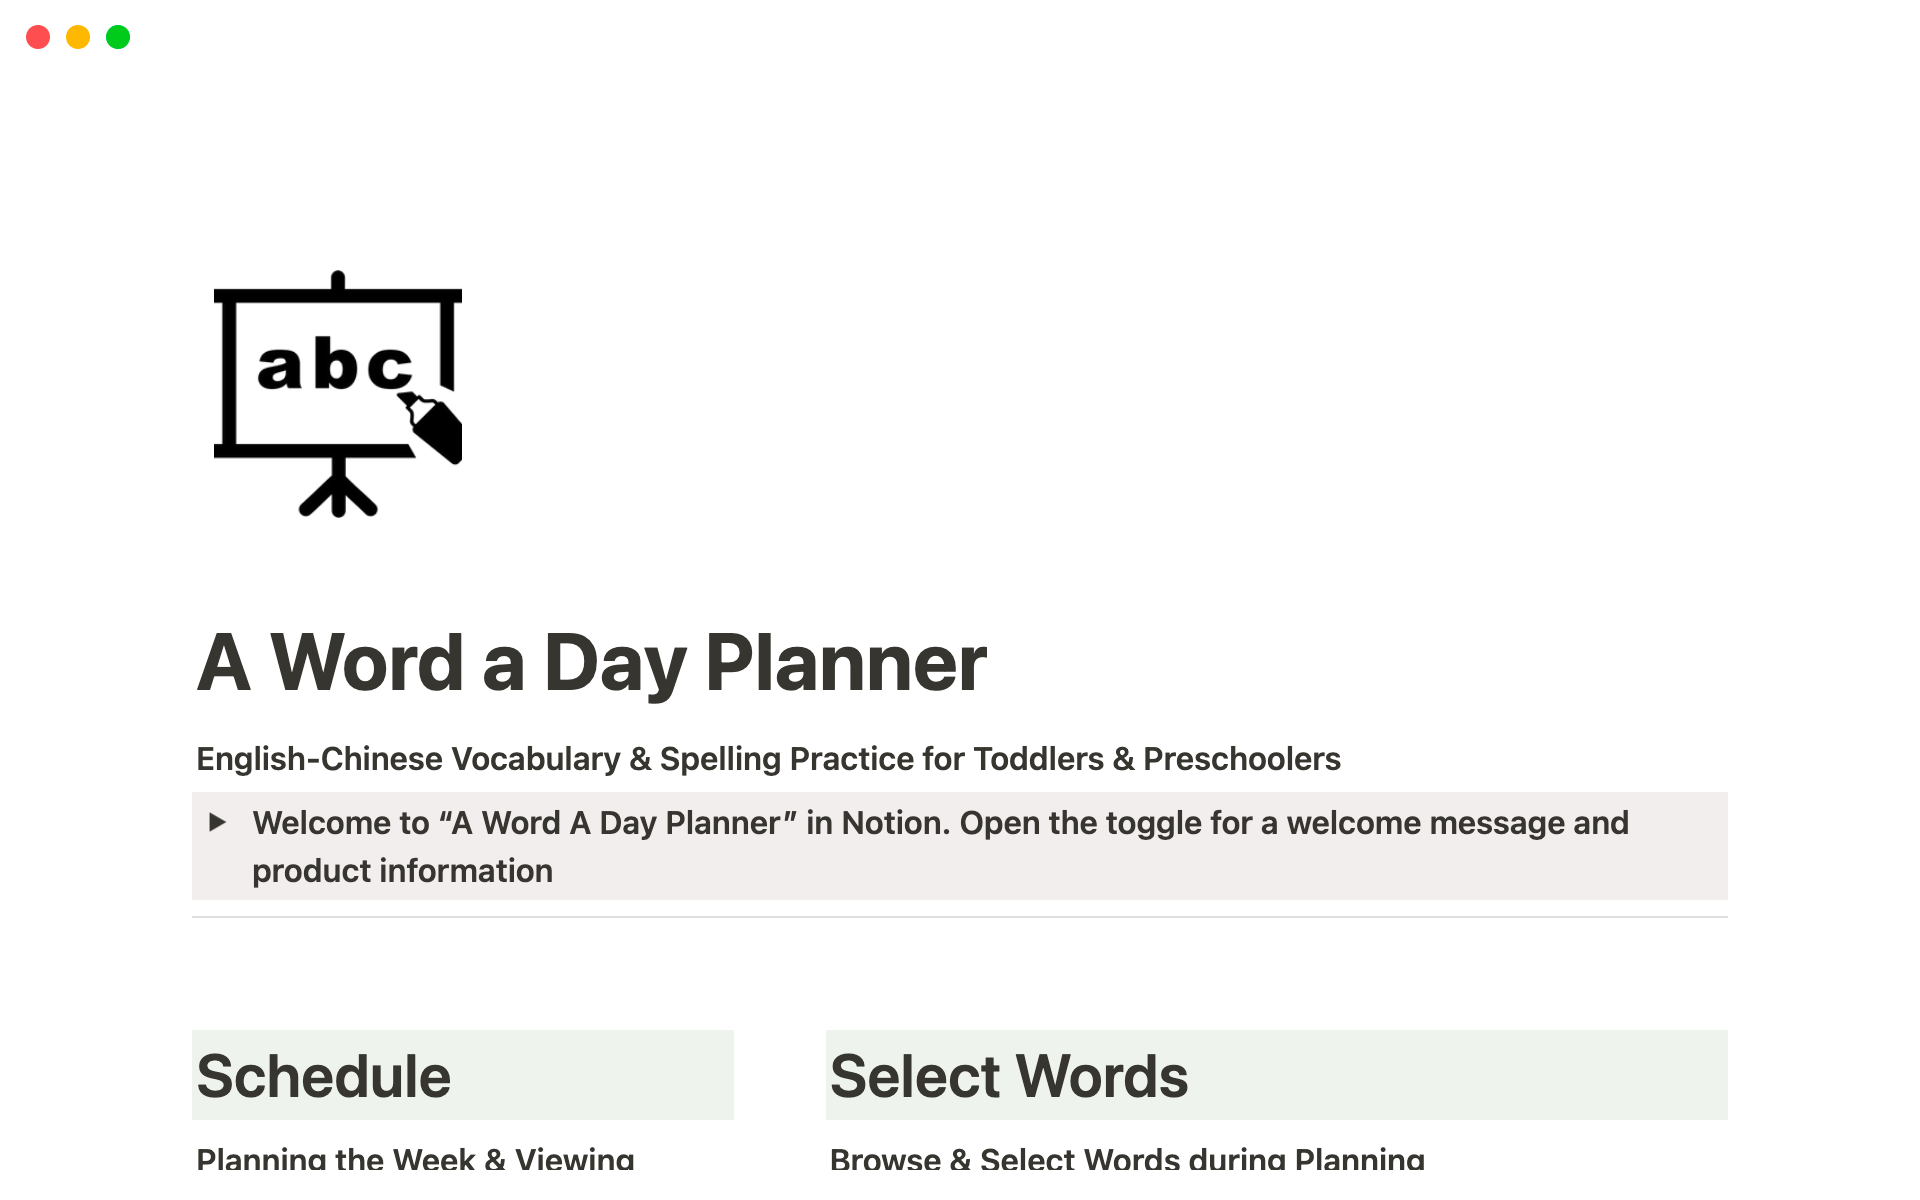 Aperçu du modèle de A Word A Day Planner | Chinese-English Words for Toddlers & Preschoolers